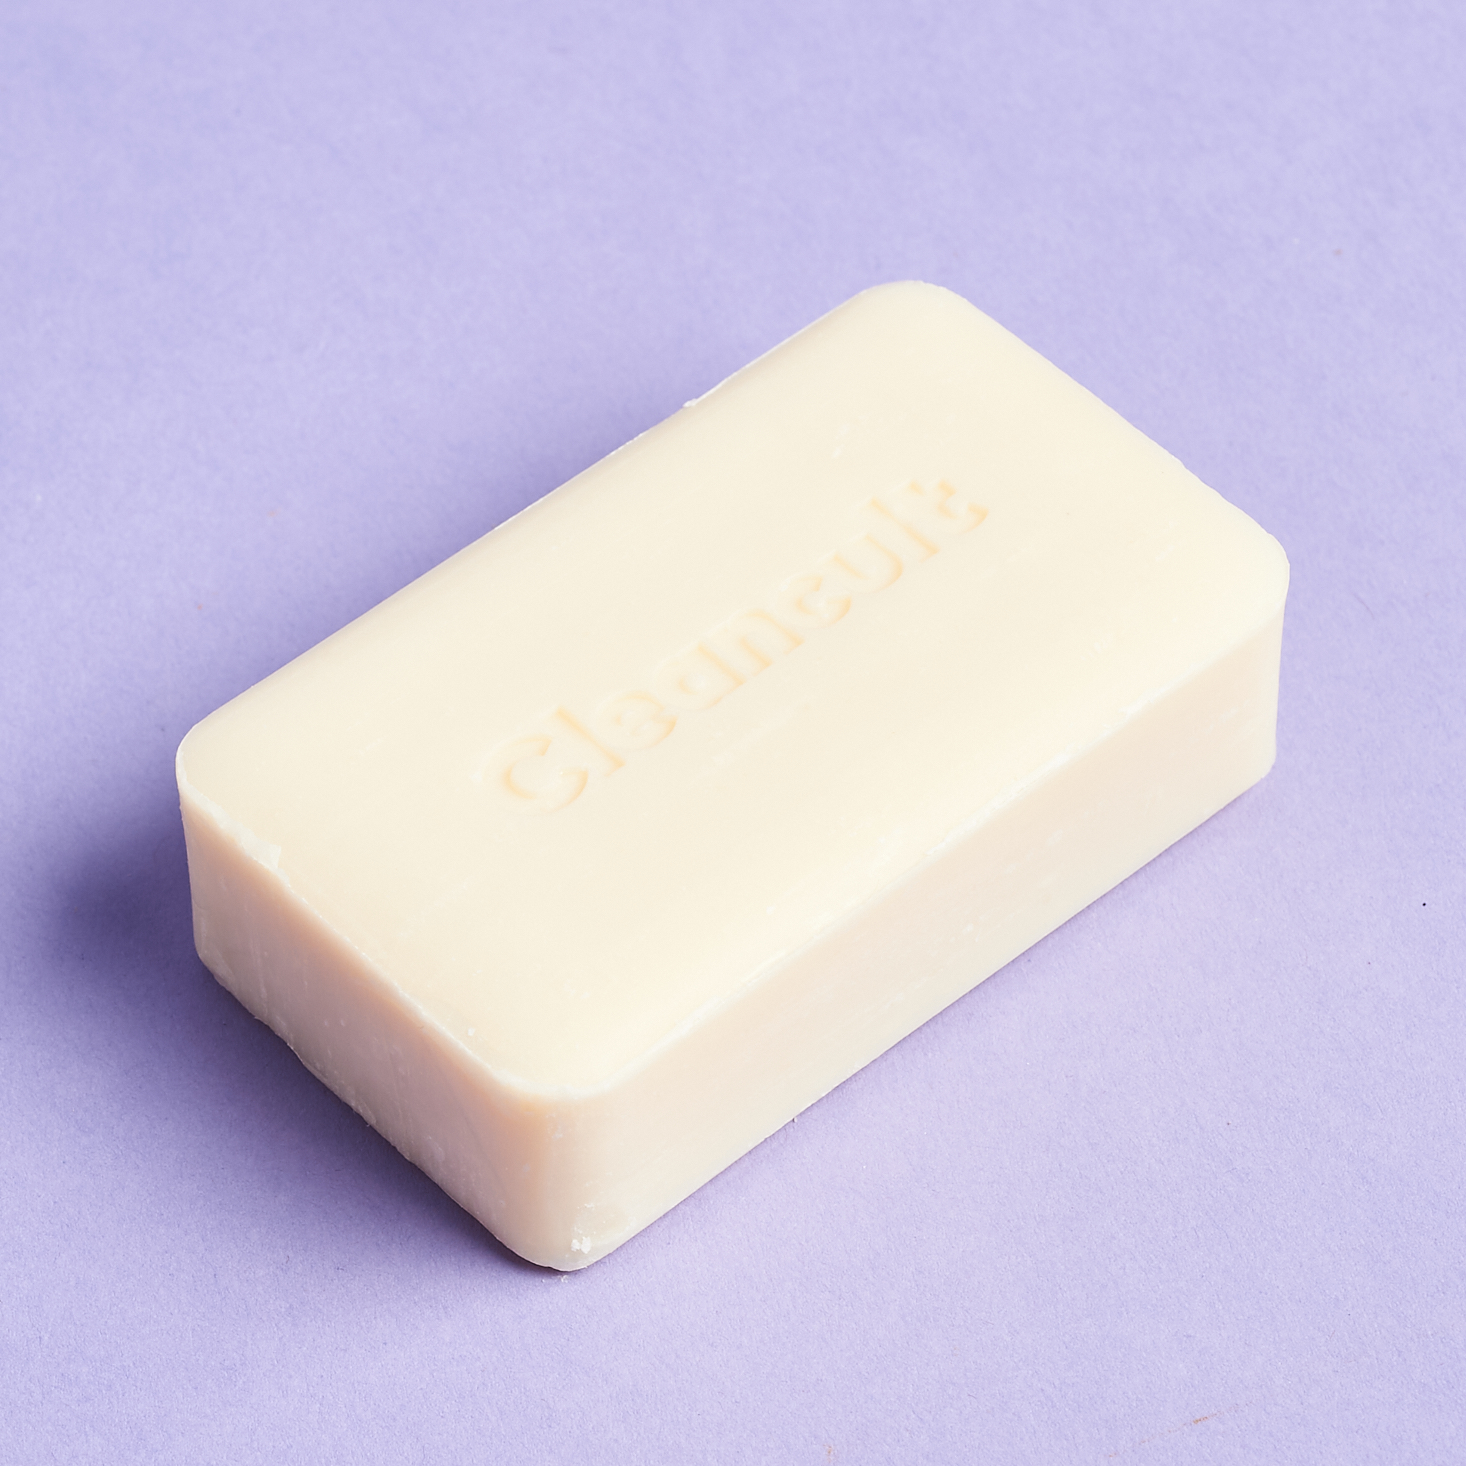 Cleancult bar soap from Earthlove April 2021